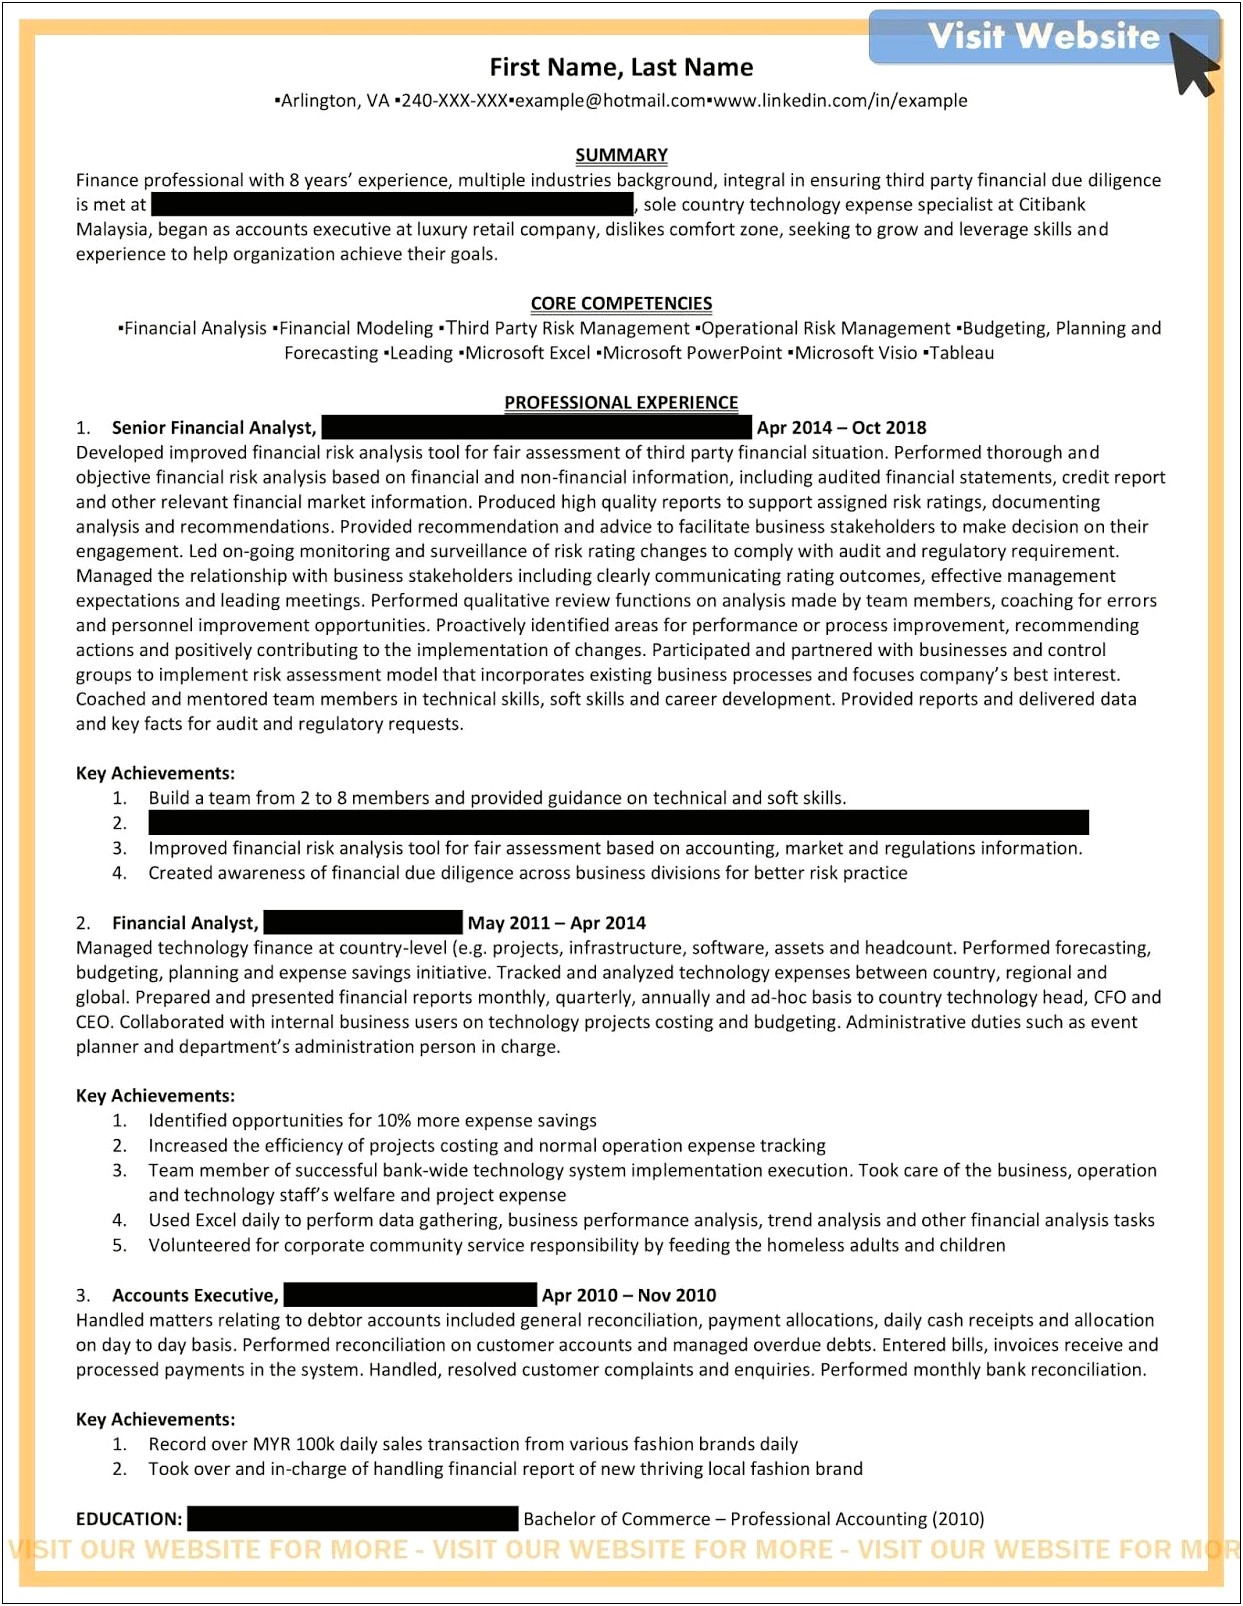 Executive Manager Resume 2019 Trends